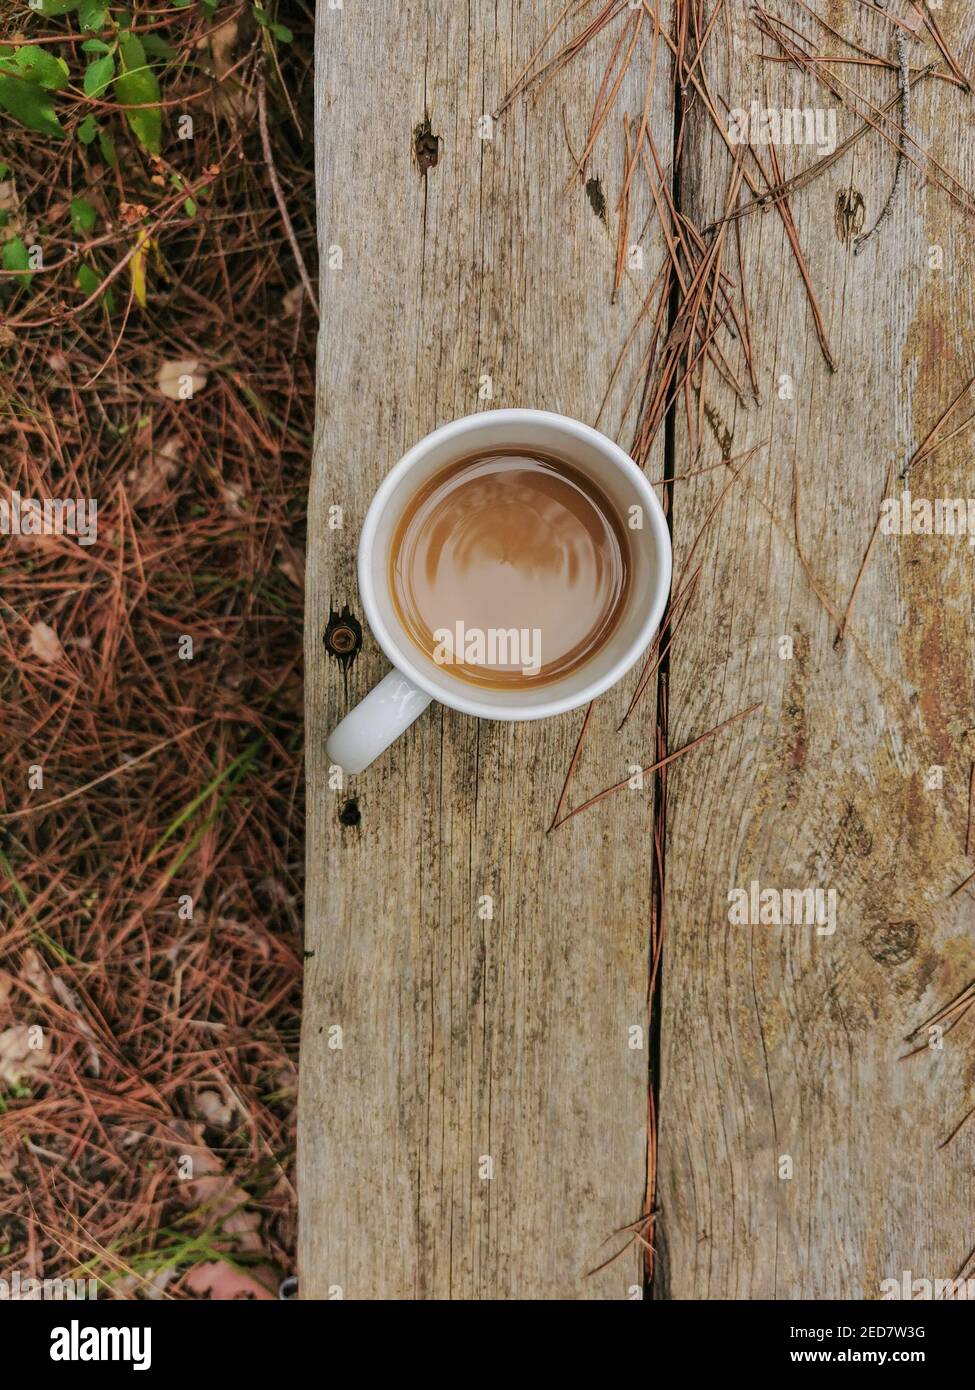 White Coffee Ceramic Mug on Wooden panel outdoor in fall atmosphere Stock Photo